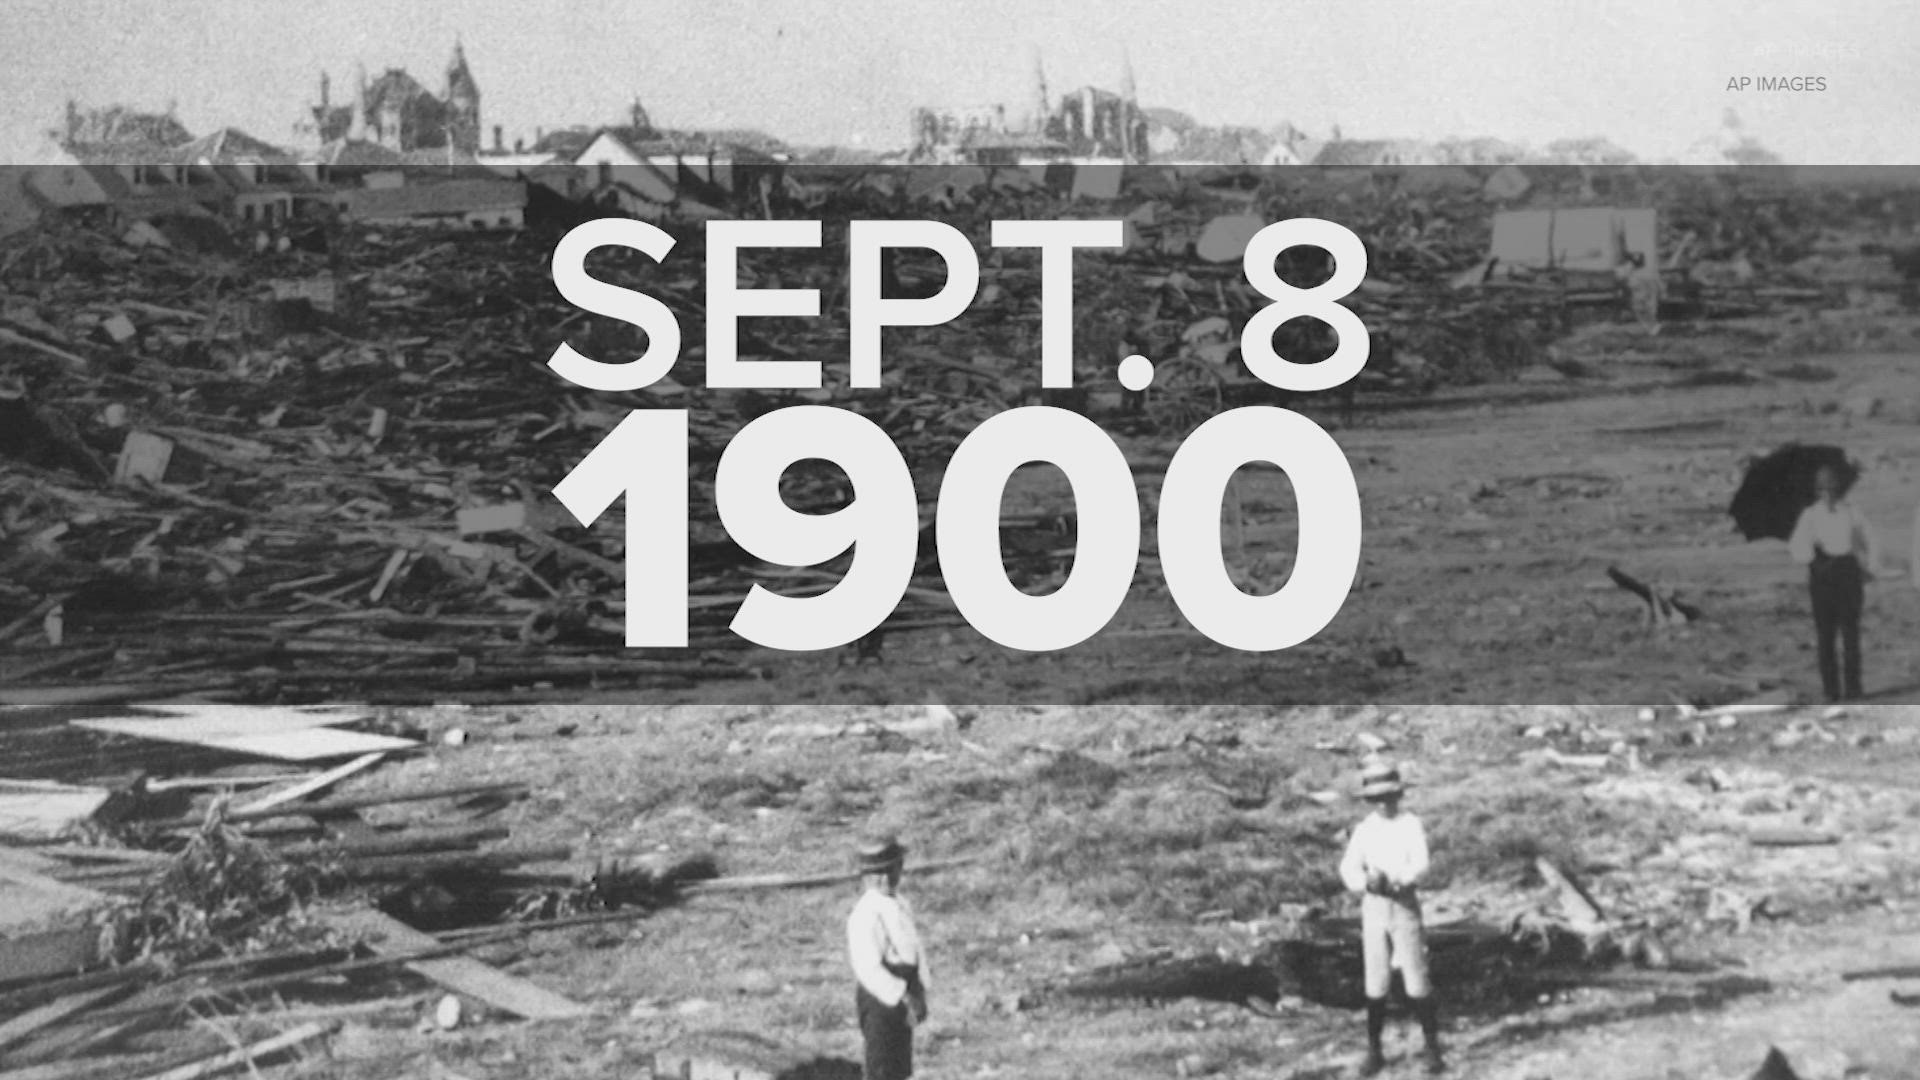 The worst natural disaster in U.S. history happened 121 years ago.